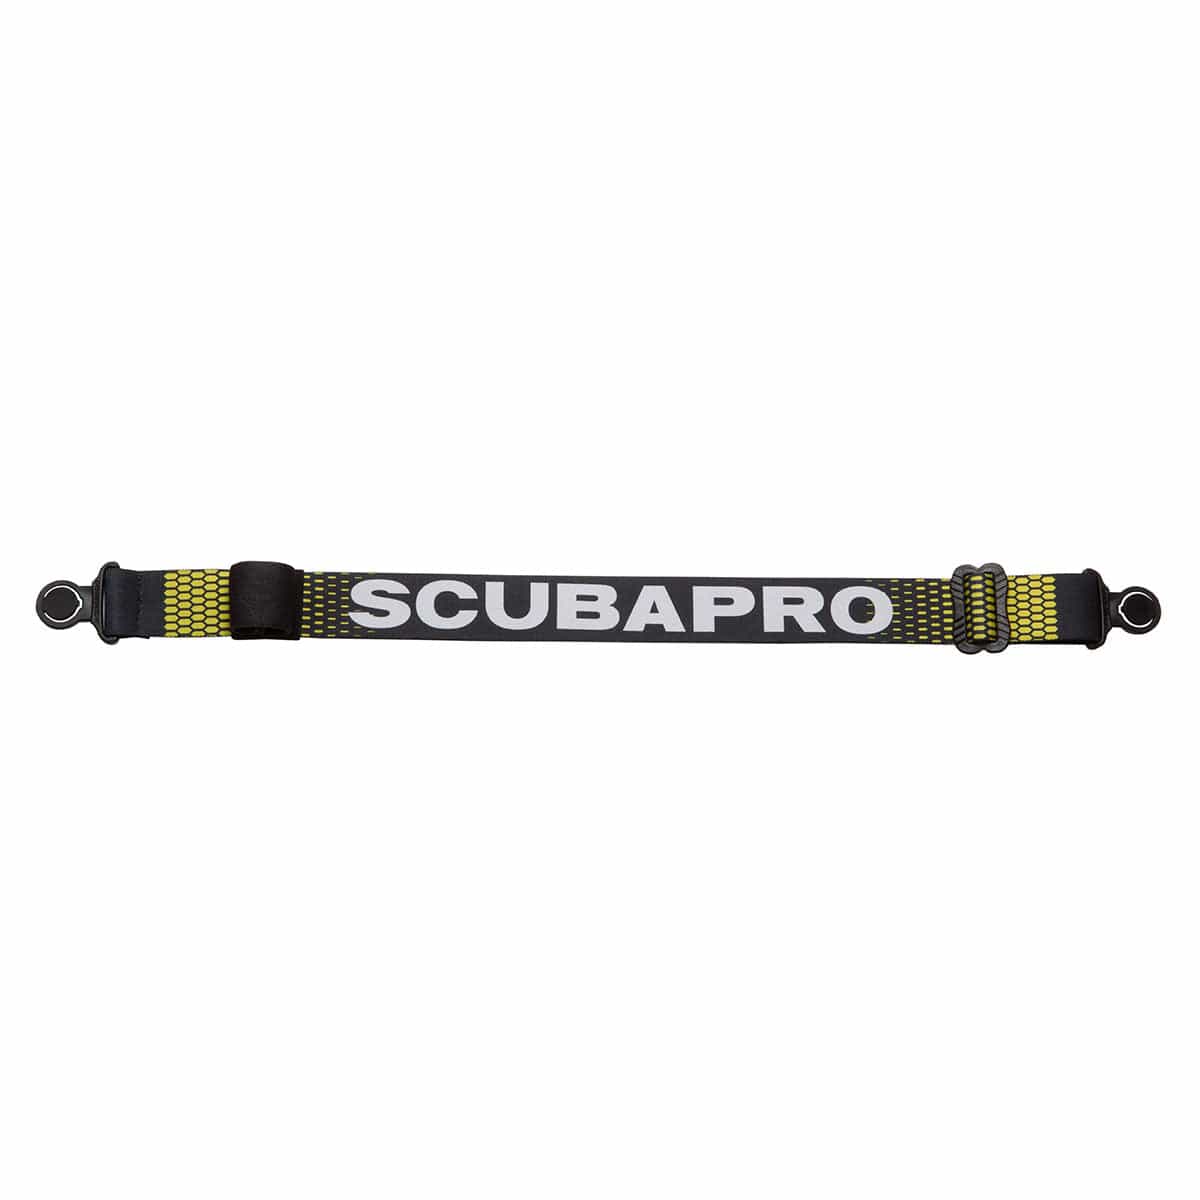 Scubapro Comfort Strap - Turquoise - 24.730.020-NED - 17